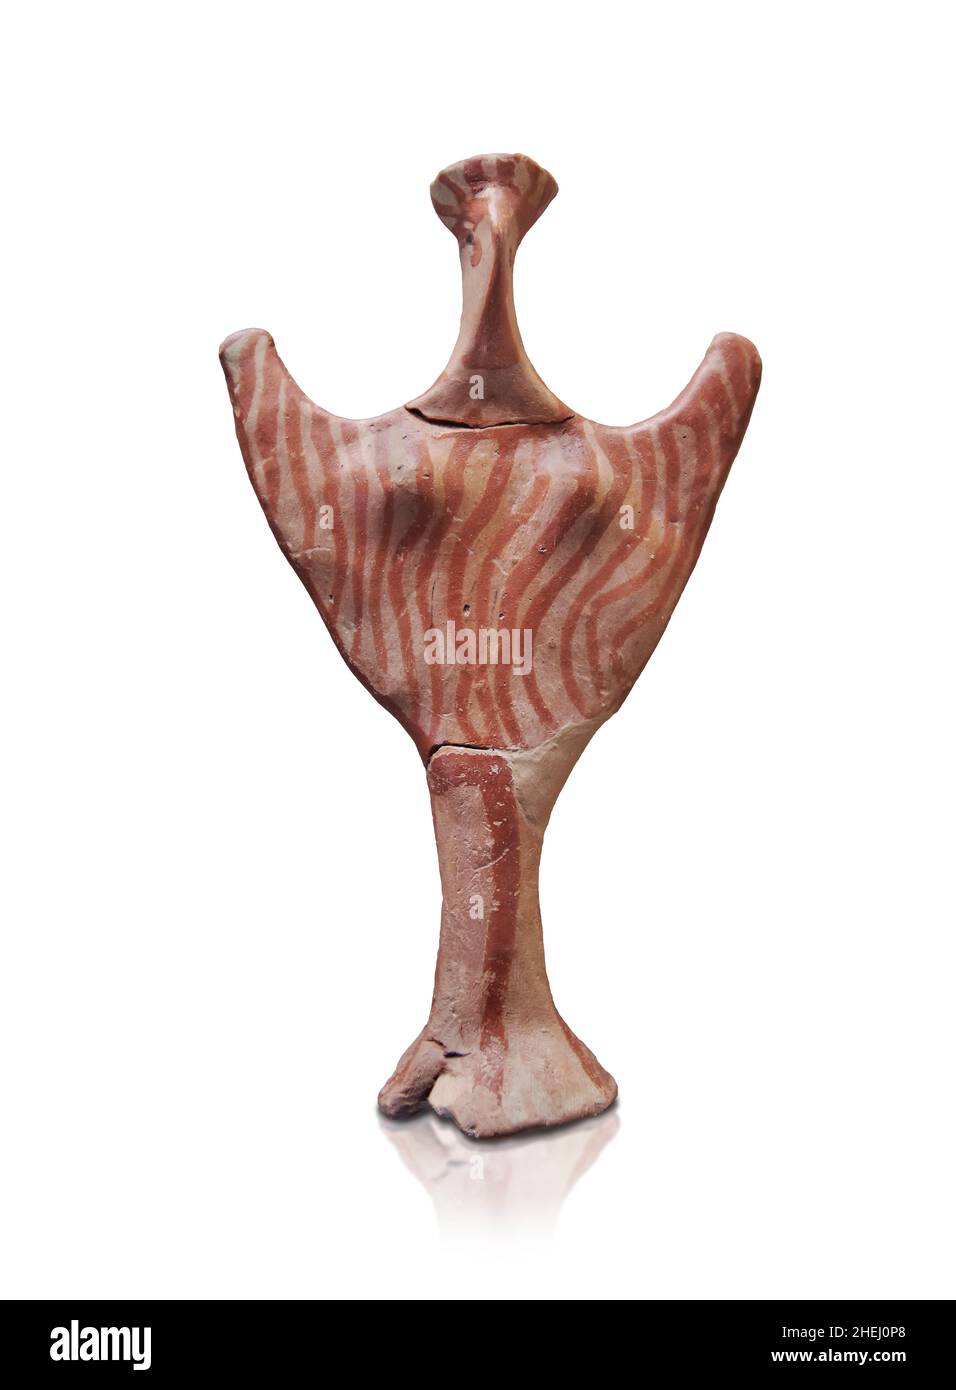 Mycenaean female figurine, Psi type, 1350-1300 BC. Mycenae archaeological site Museum, Greece. From the Petas House Group, Room F. Ref LH IIIA2.  The Stock Photo